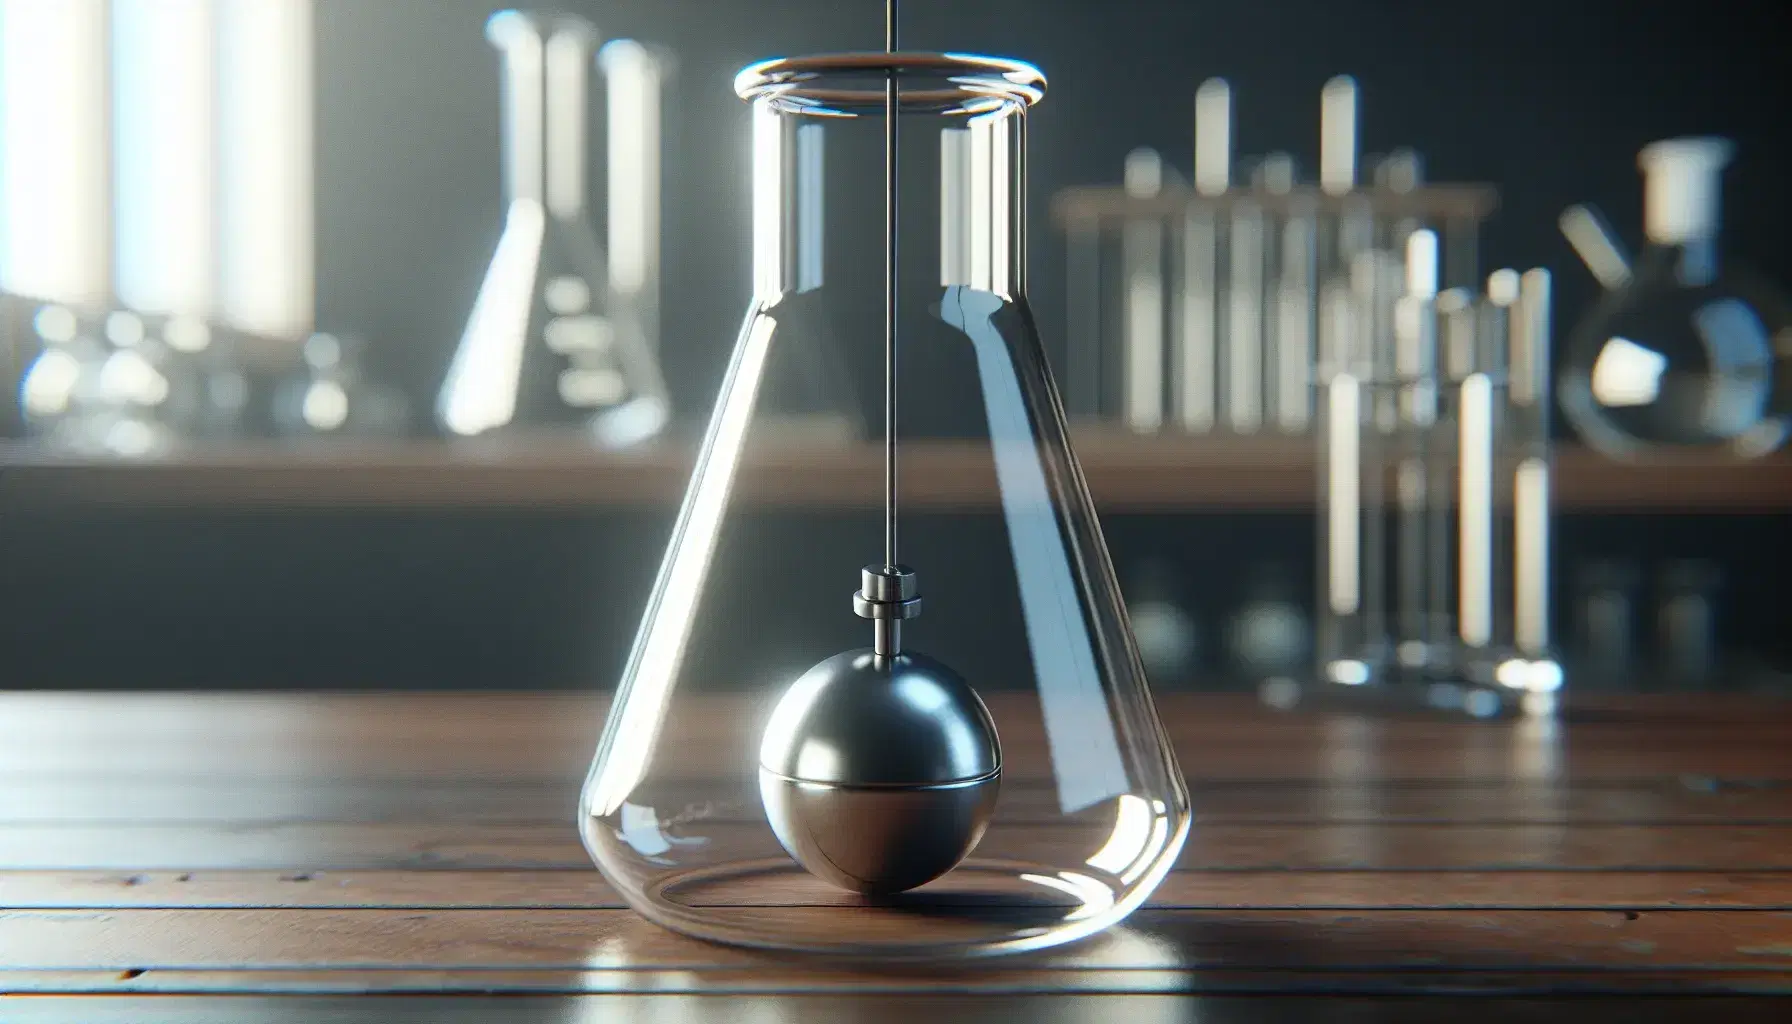 Clear glass flask with metallic pendulum at equilibrium on wooden table in a blurred laboratory background, showcasing scientific research equipment.